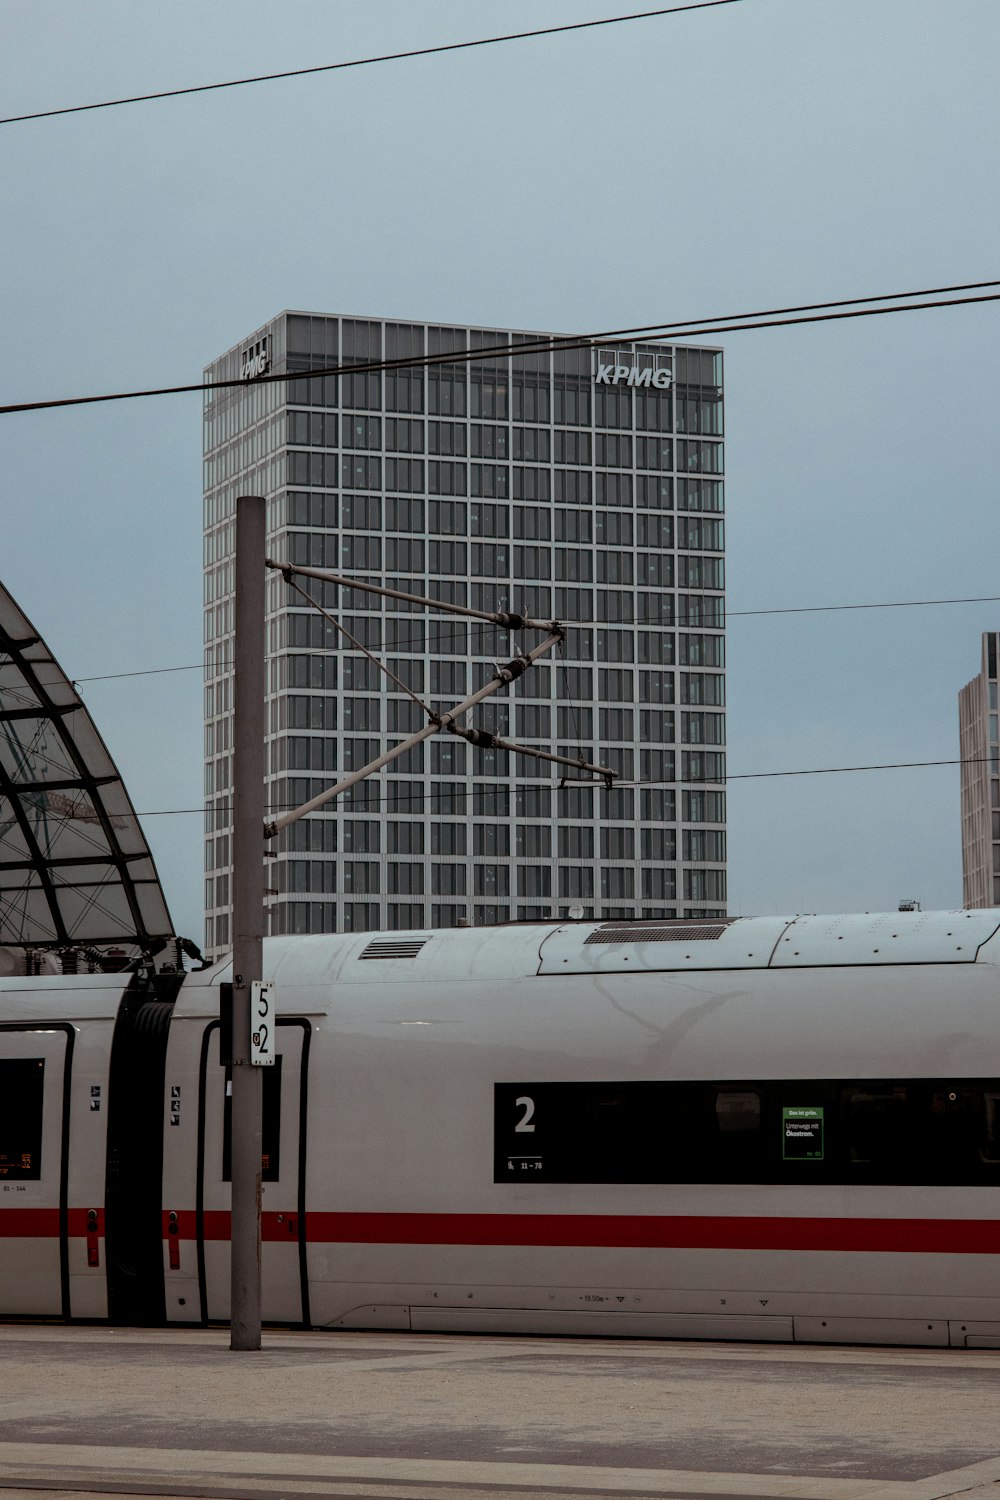 a white and red train traveling past a tall building